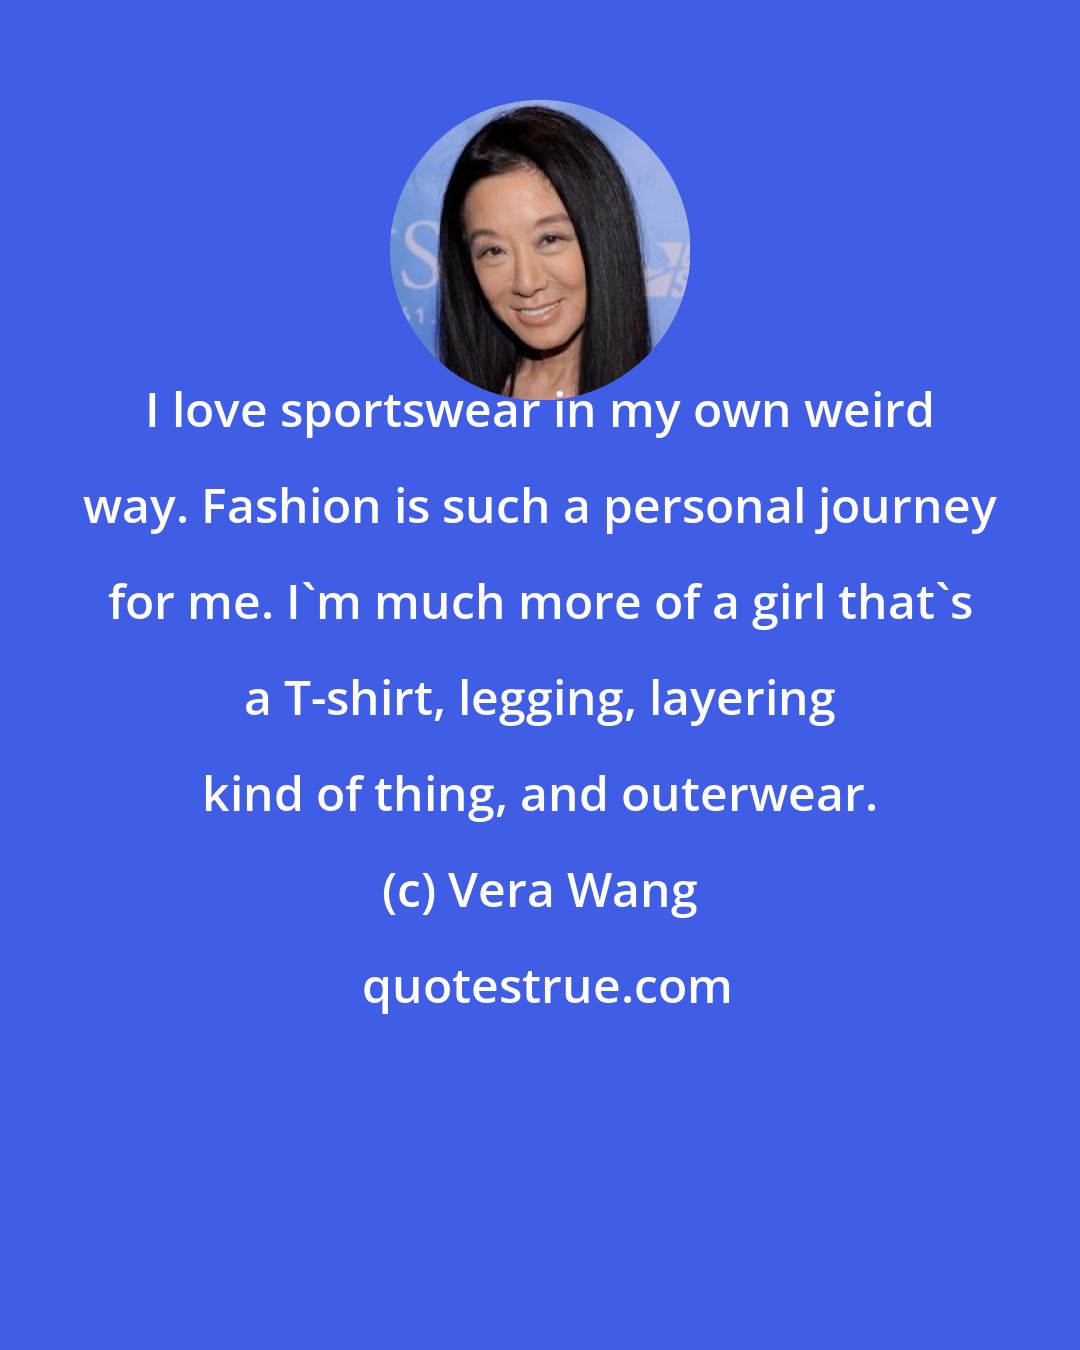 Vera Wang: I love sportswear in my own weird way. Fashion is such a personal journey for me. I'm much more of a girl that's a T-shirt, legging, layering kind of thing, and outerwear.